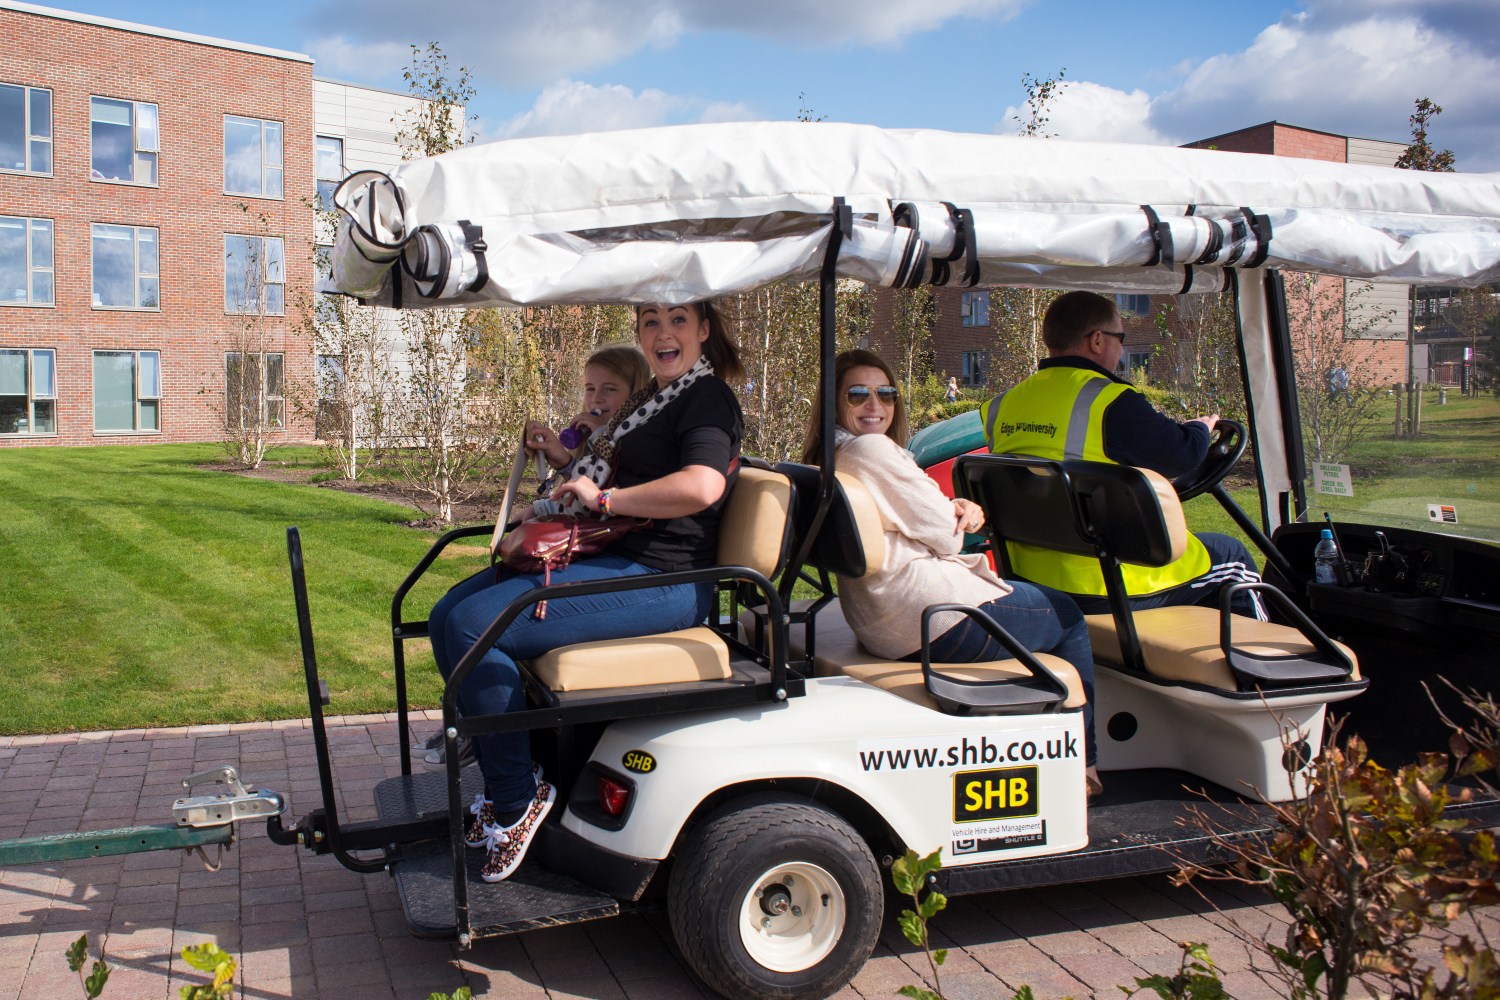 A student and her family take a buggy ride on campus.